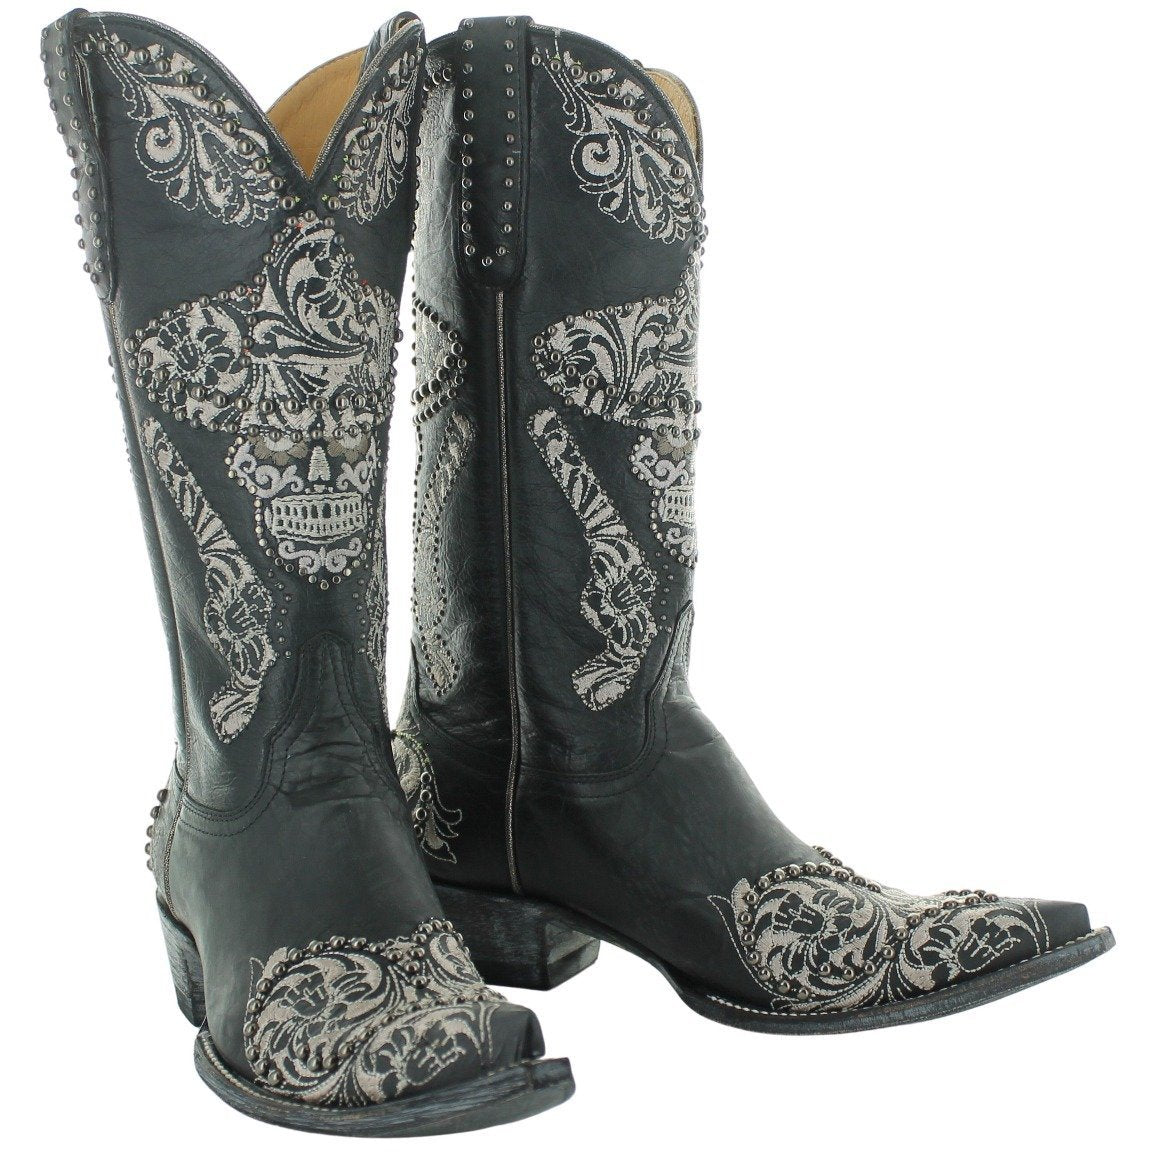 Black Skull Gun's Up Boots at 6Whiskey six whisky by Old Gringo detailed embroidery